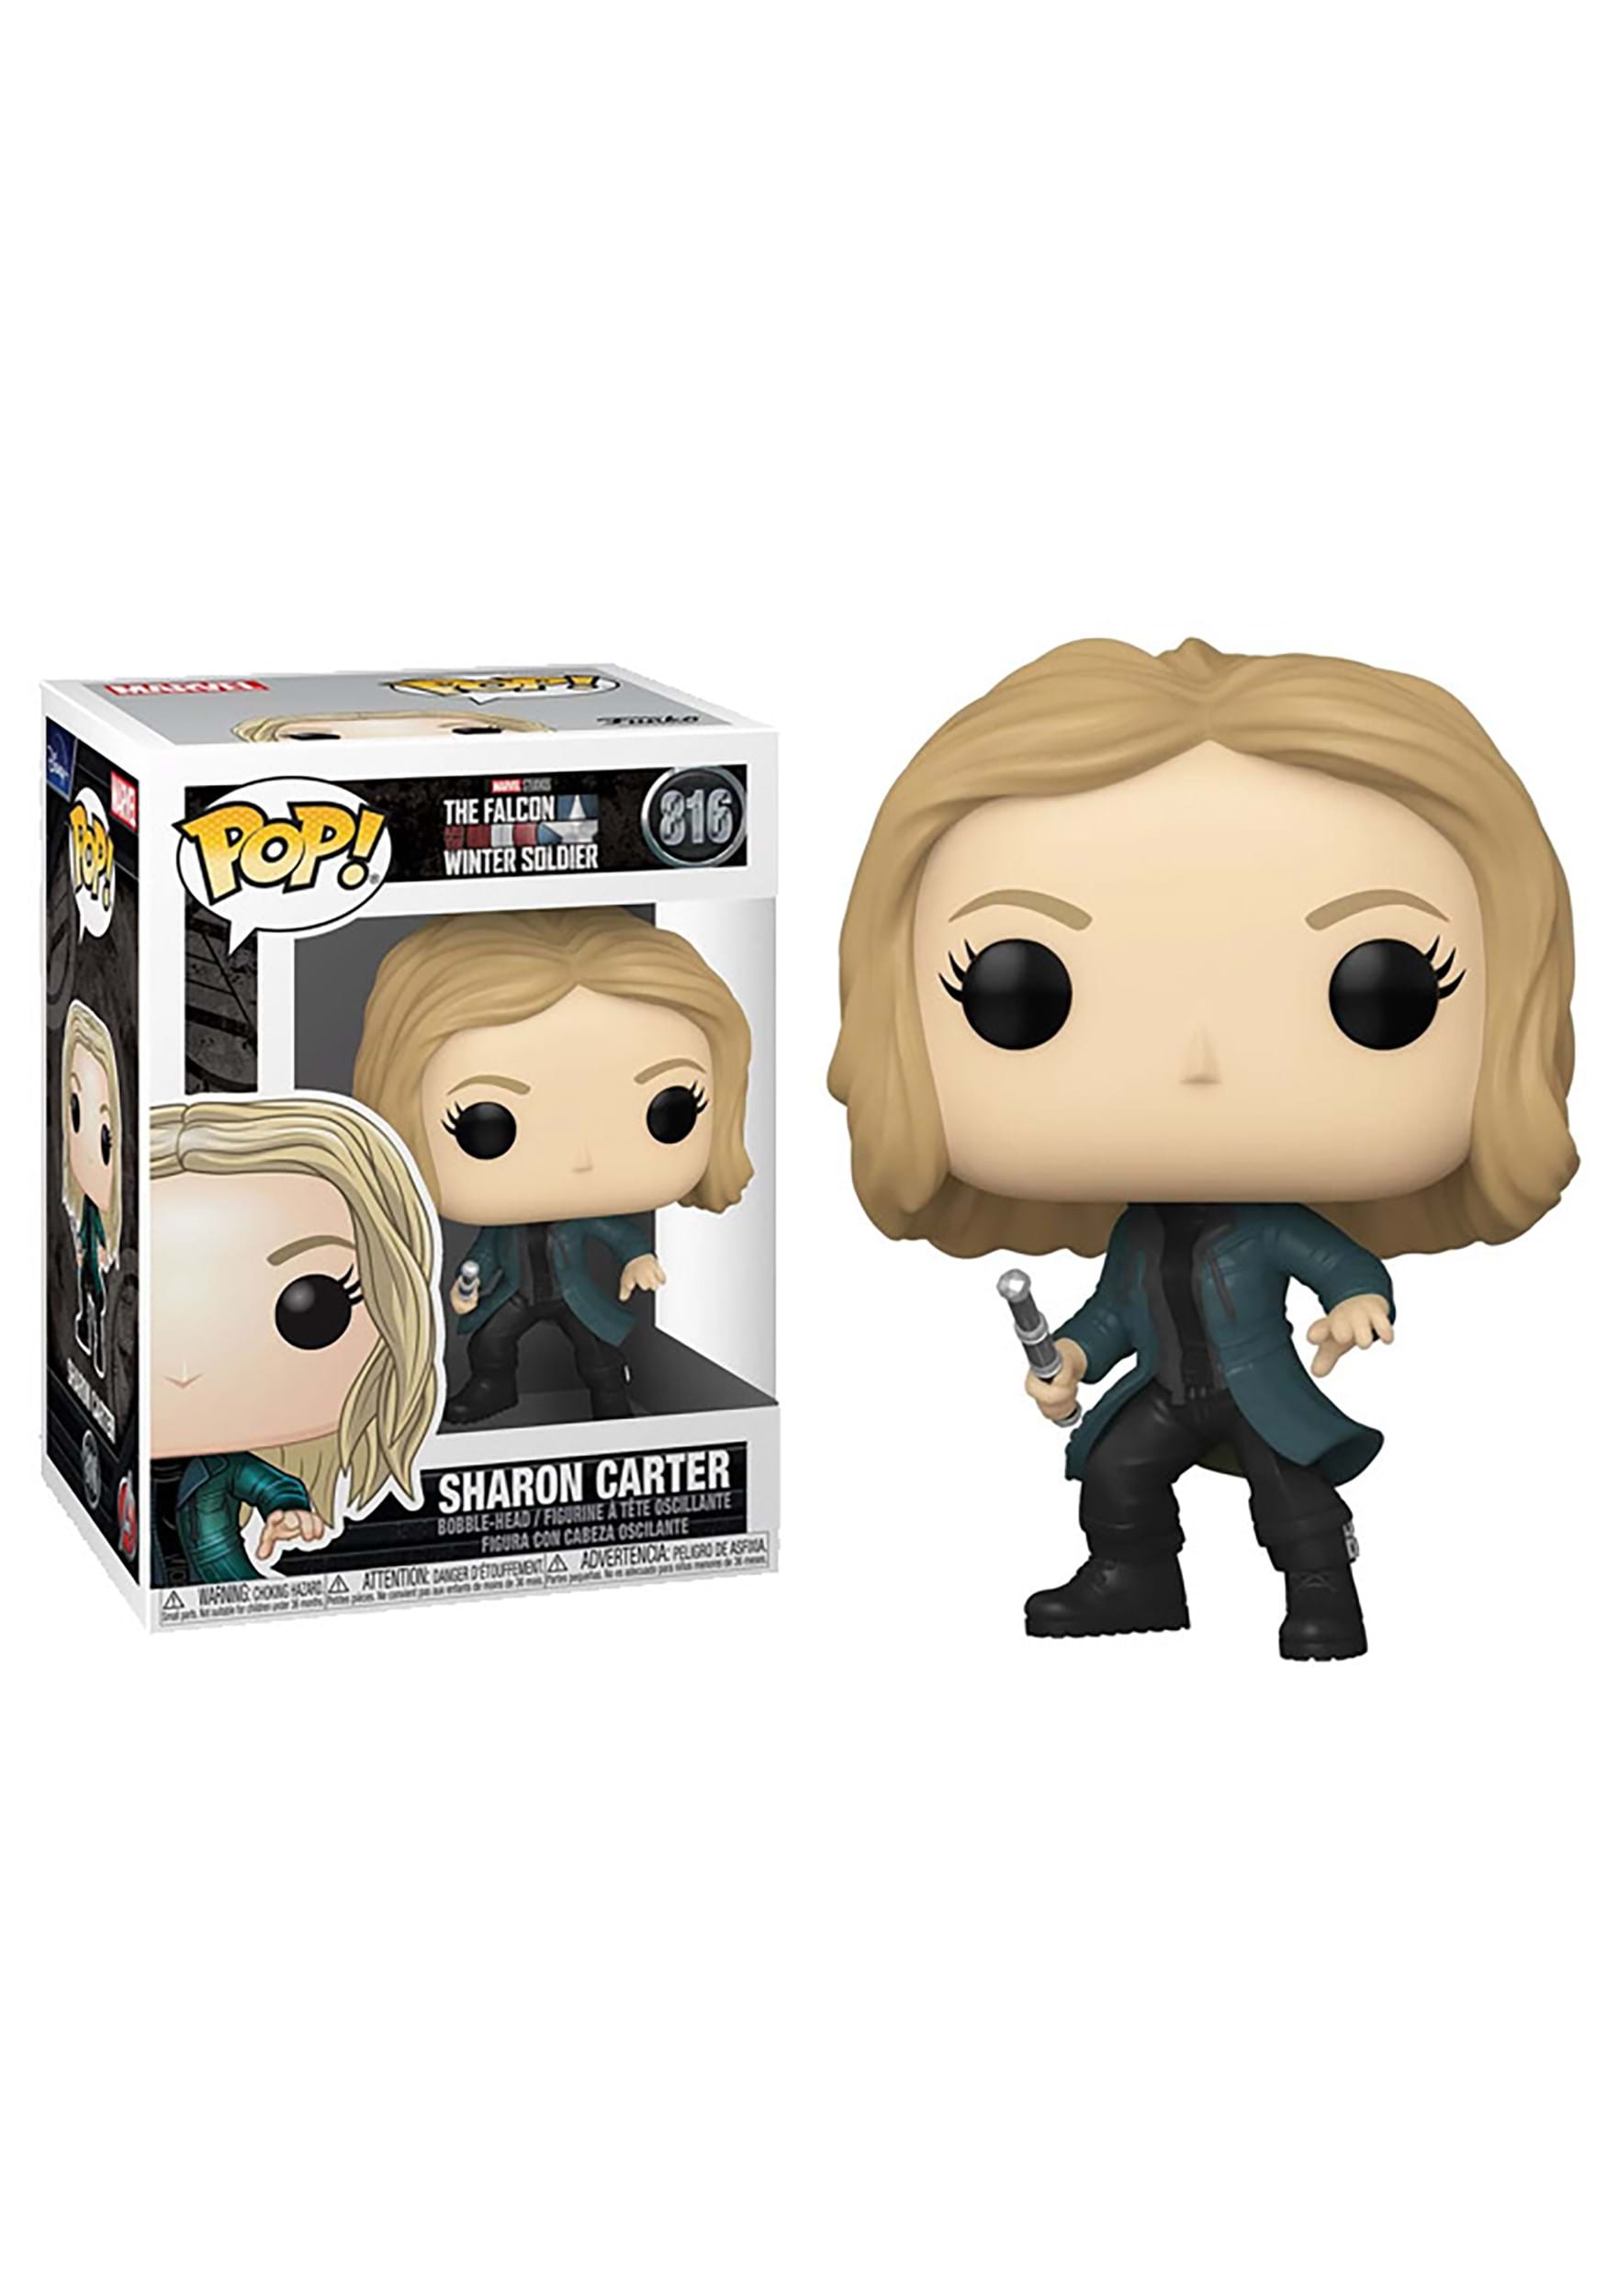 POP!: The Falcon & the Winter Soldier-Sharon Carter Figure